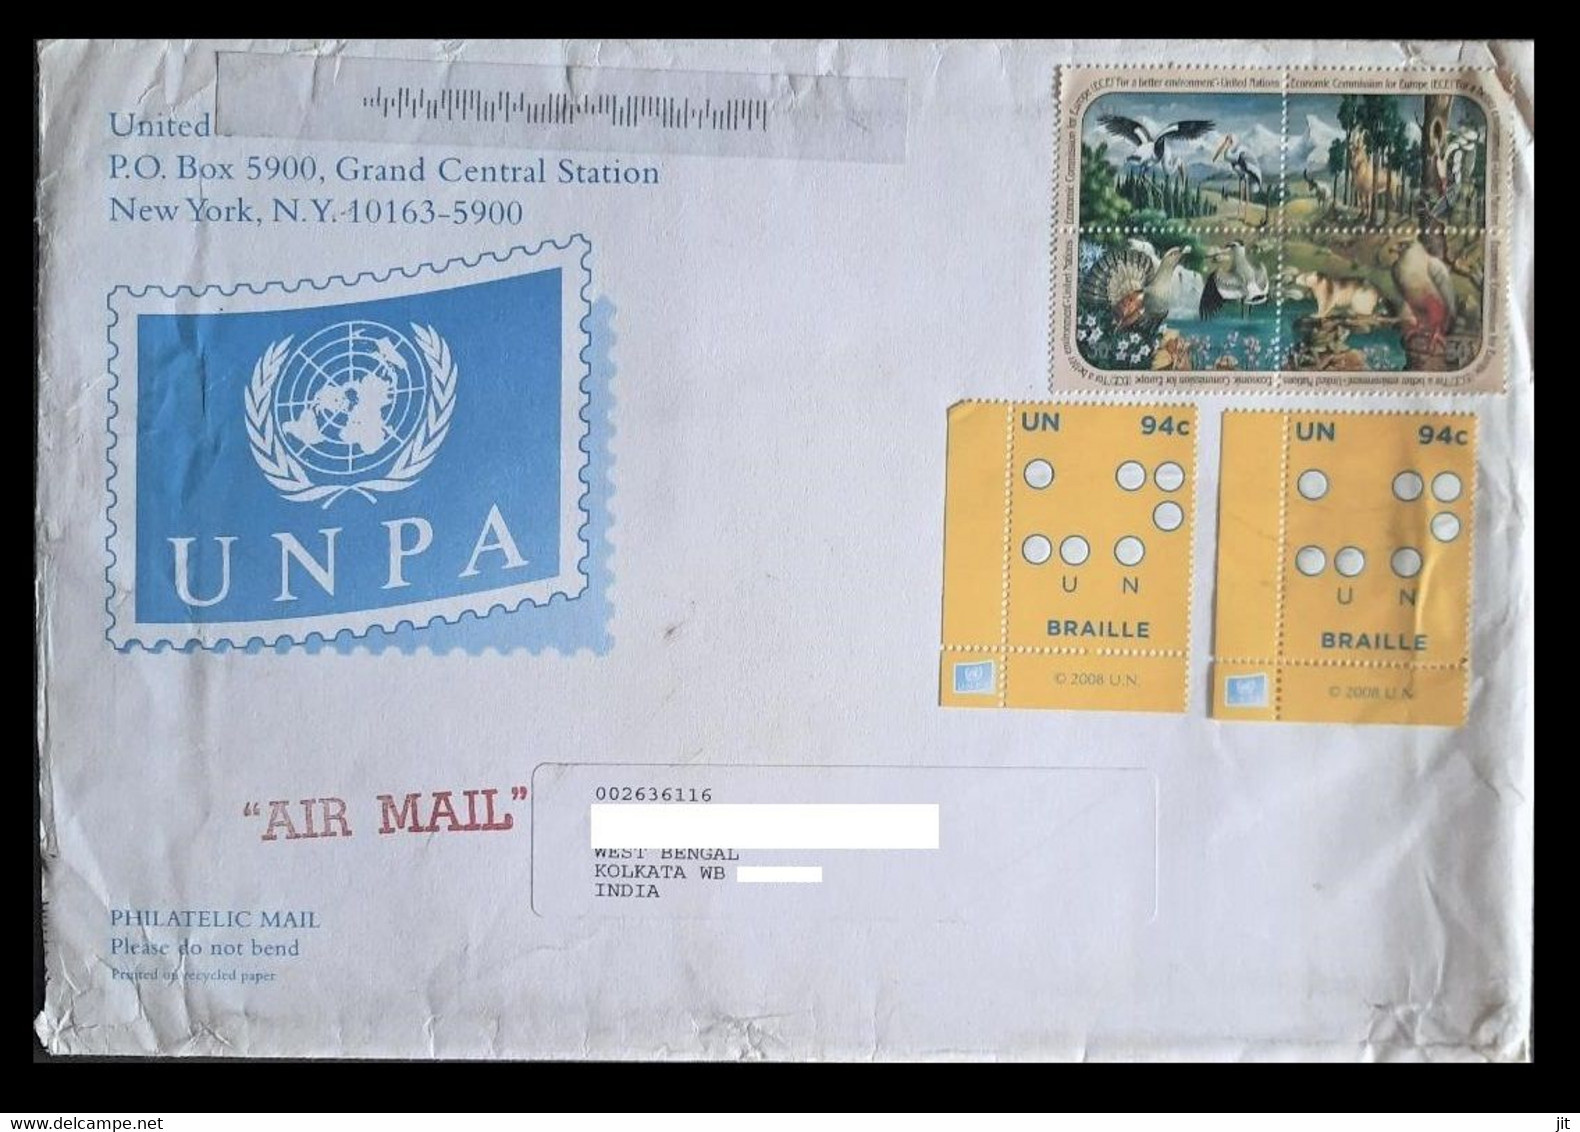 157. UNITED NATIONS USED REGULAR AIRMAIL ENVELOPE COVER FROM UN TO INDIA WITH BRAILLE , FLORA &  FAUNA  STAMP. - Poste Aérienne